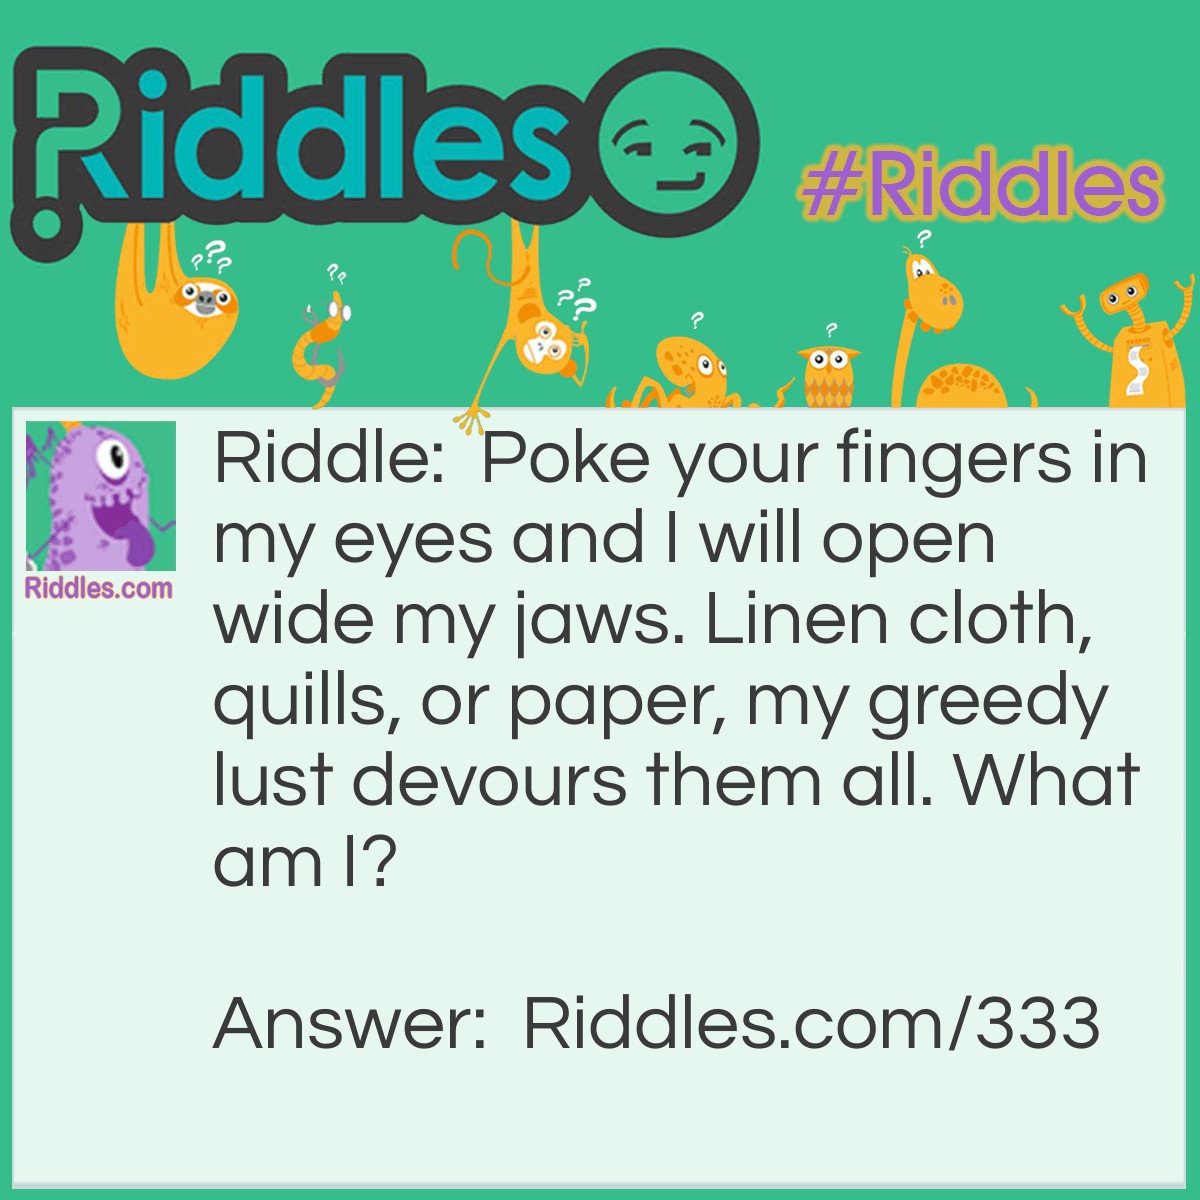 Riddle: Poke your fingers in my eyes and I will open wide my jaws. Linen cloth, quills, or paper, my greedy lust devours them all. What am I? Answer: Shears, or scissors.